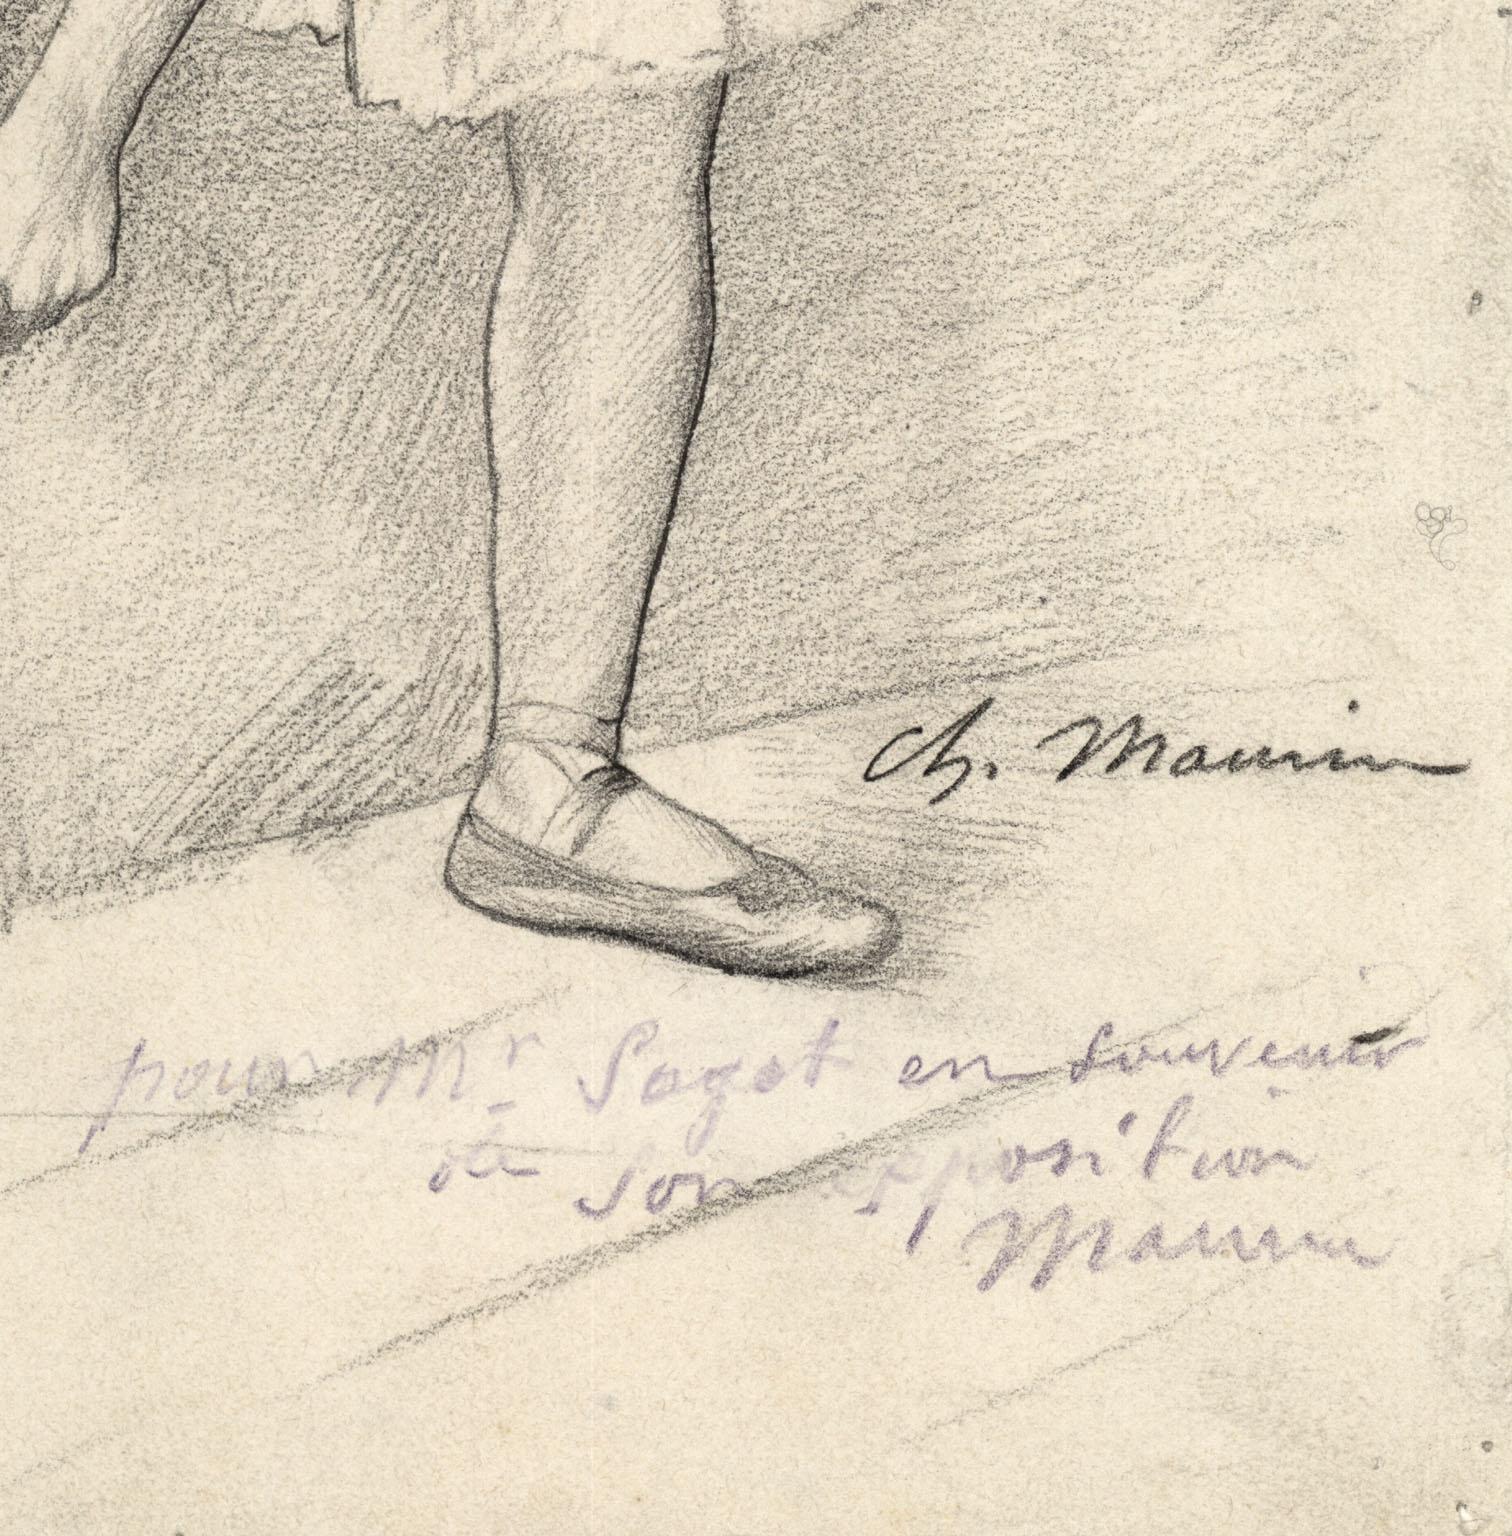 Ballet Dancer, untitled drawing. - Art by Charles Maurin